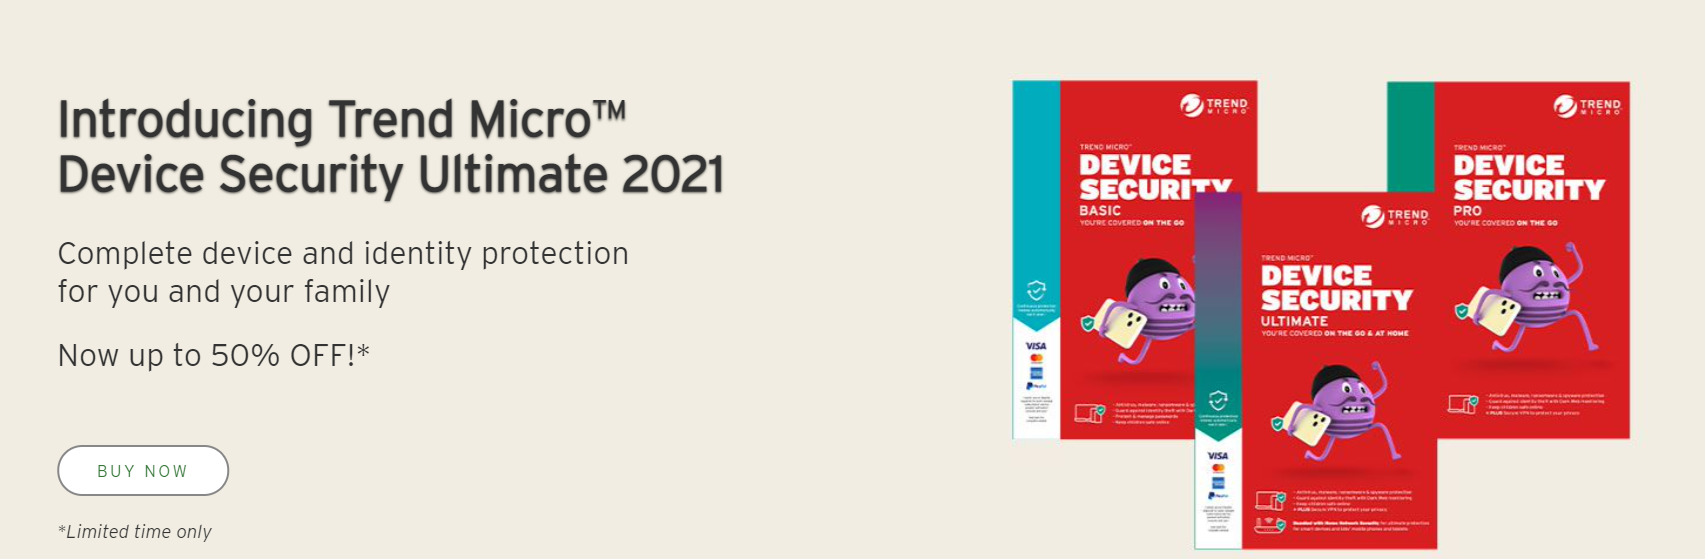 Save up to 50% OFF on Device Security Ultimate 2021